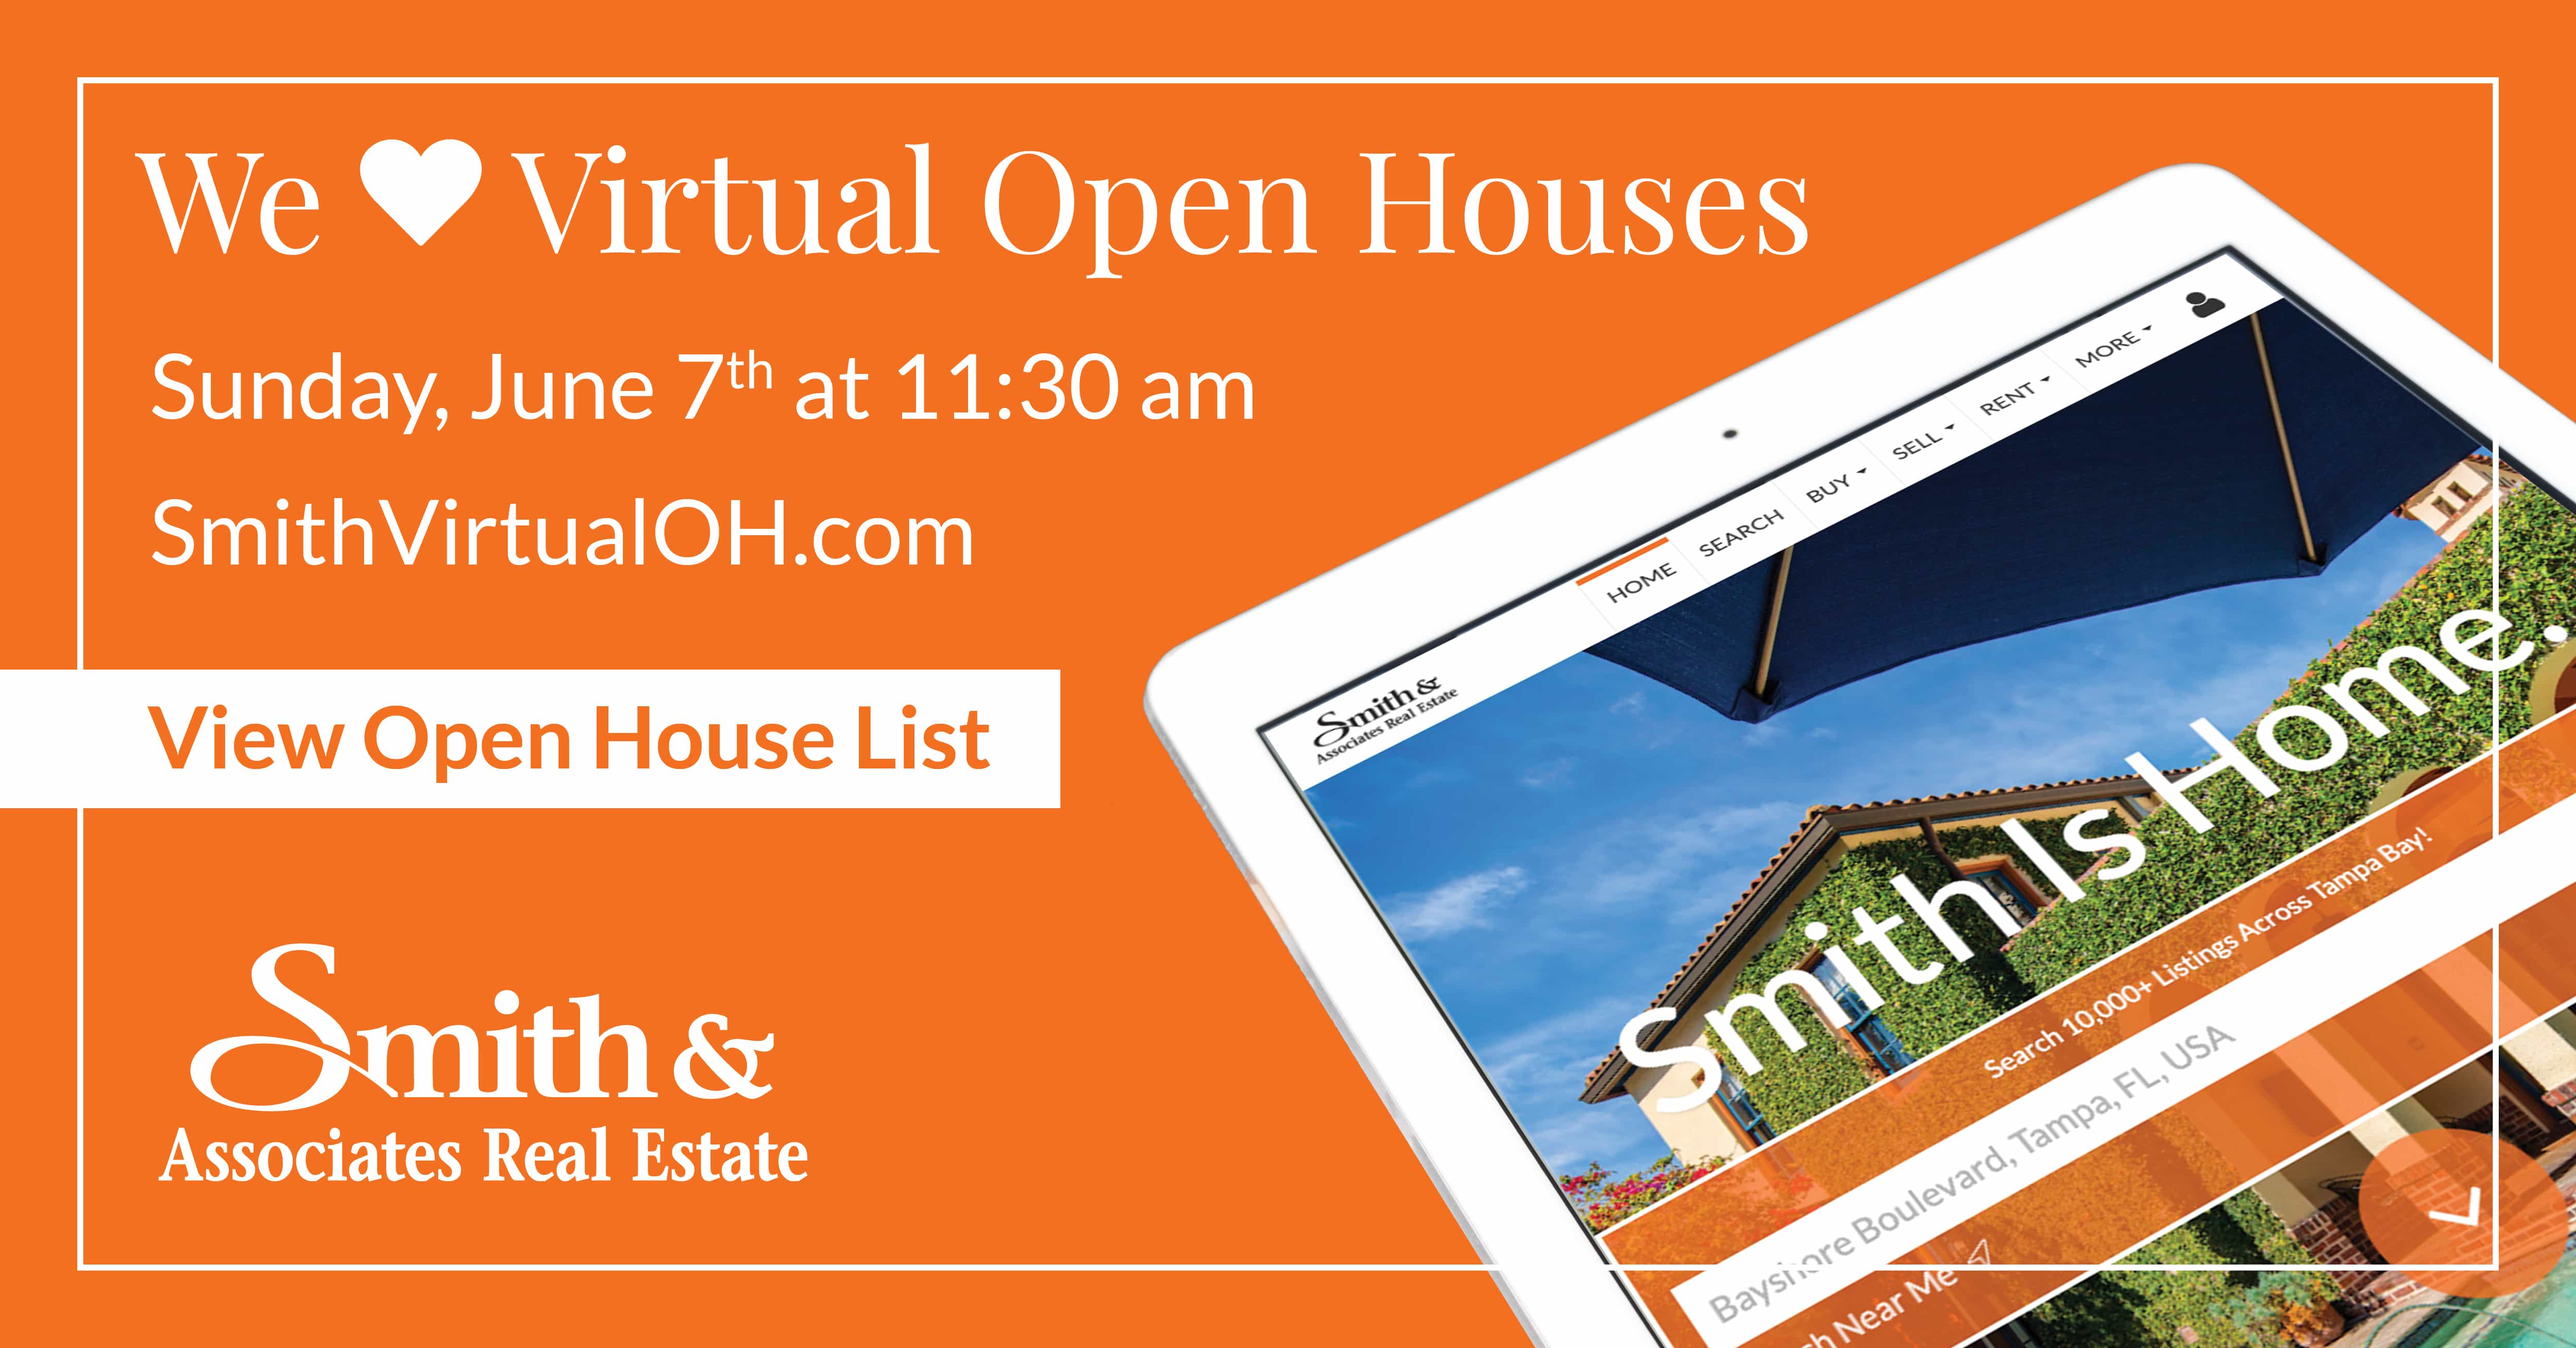 Ad creative for smith virtual open house event on sunday, june 7th